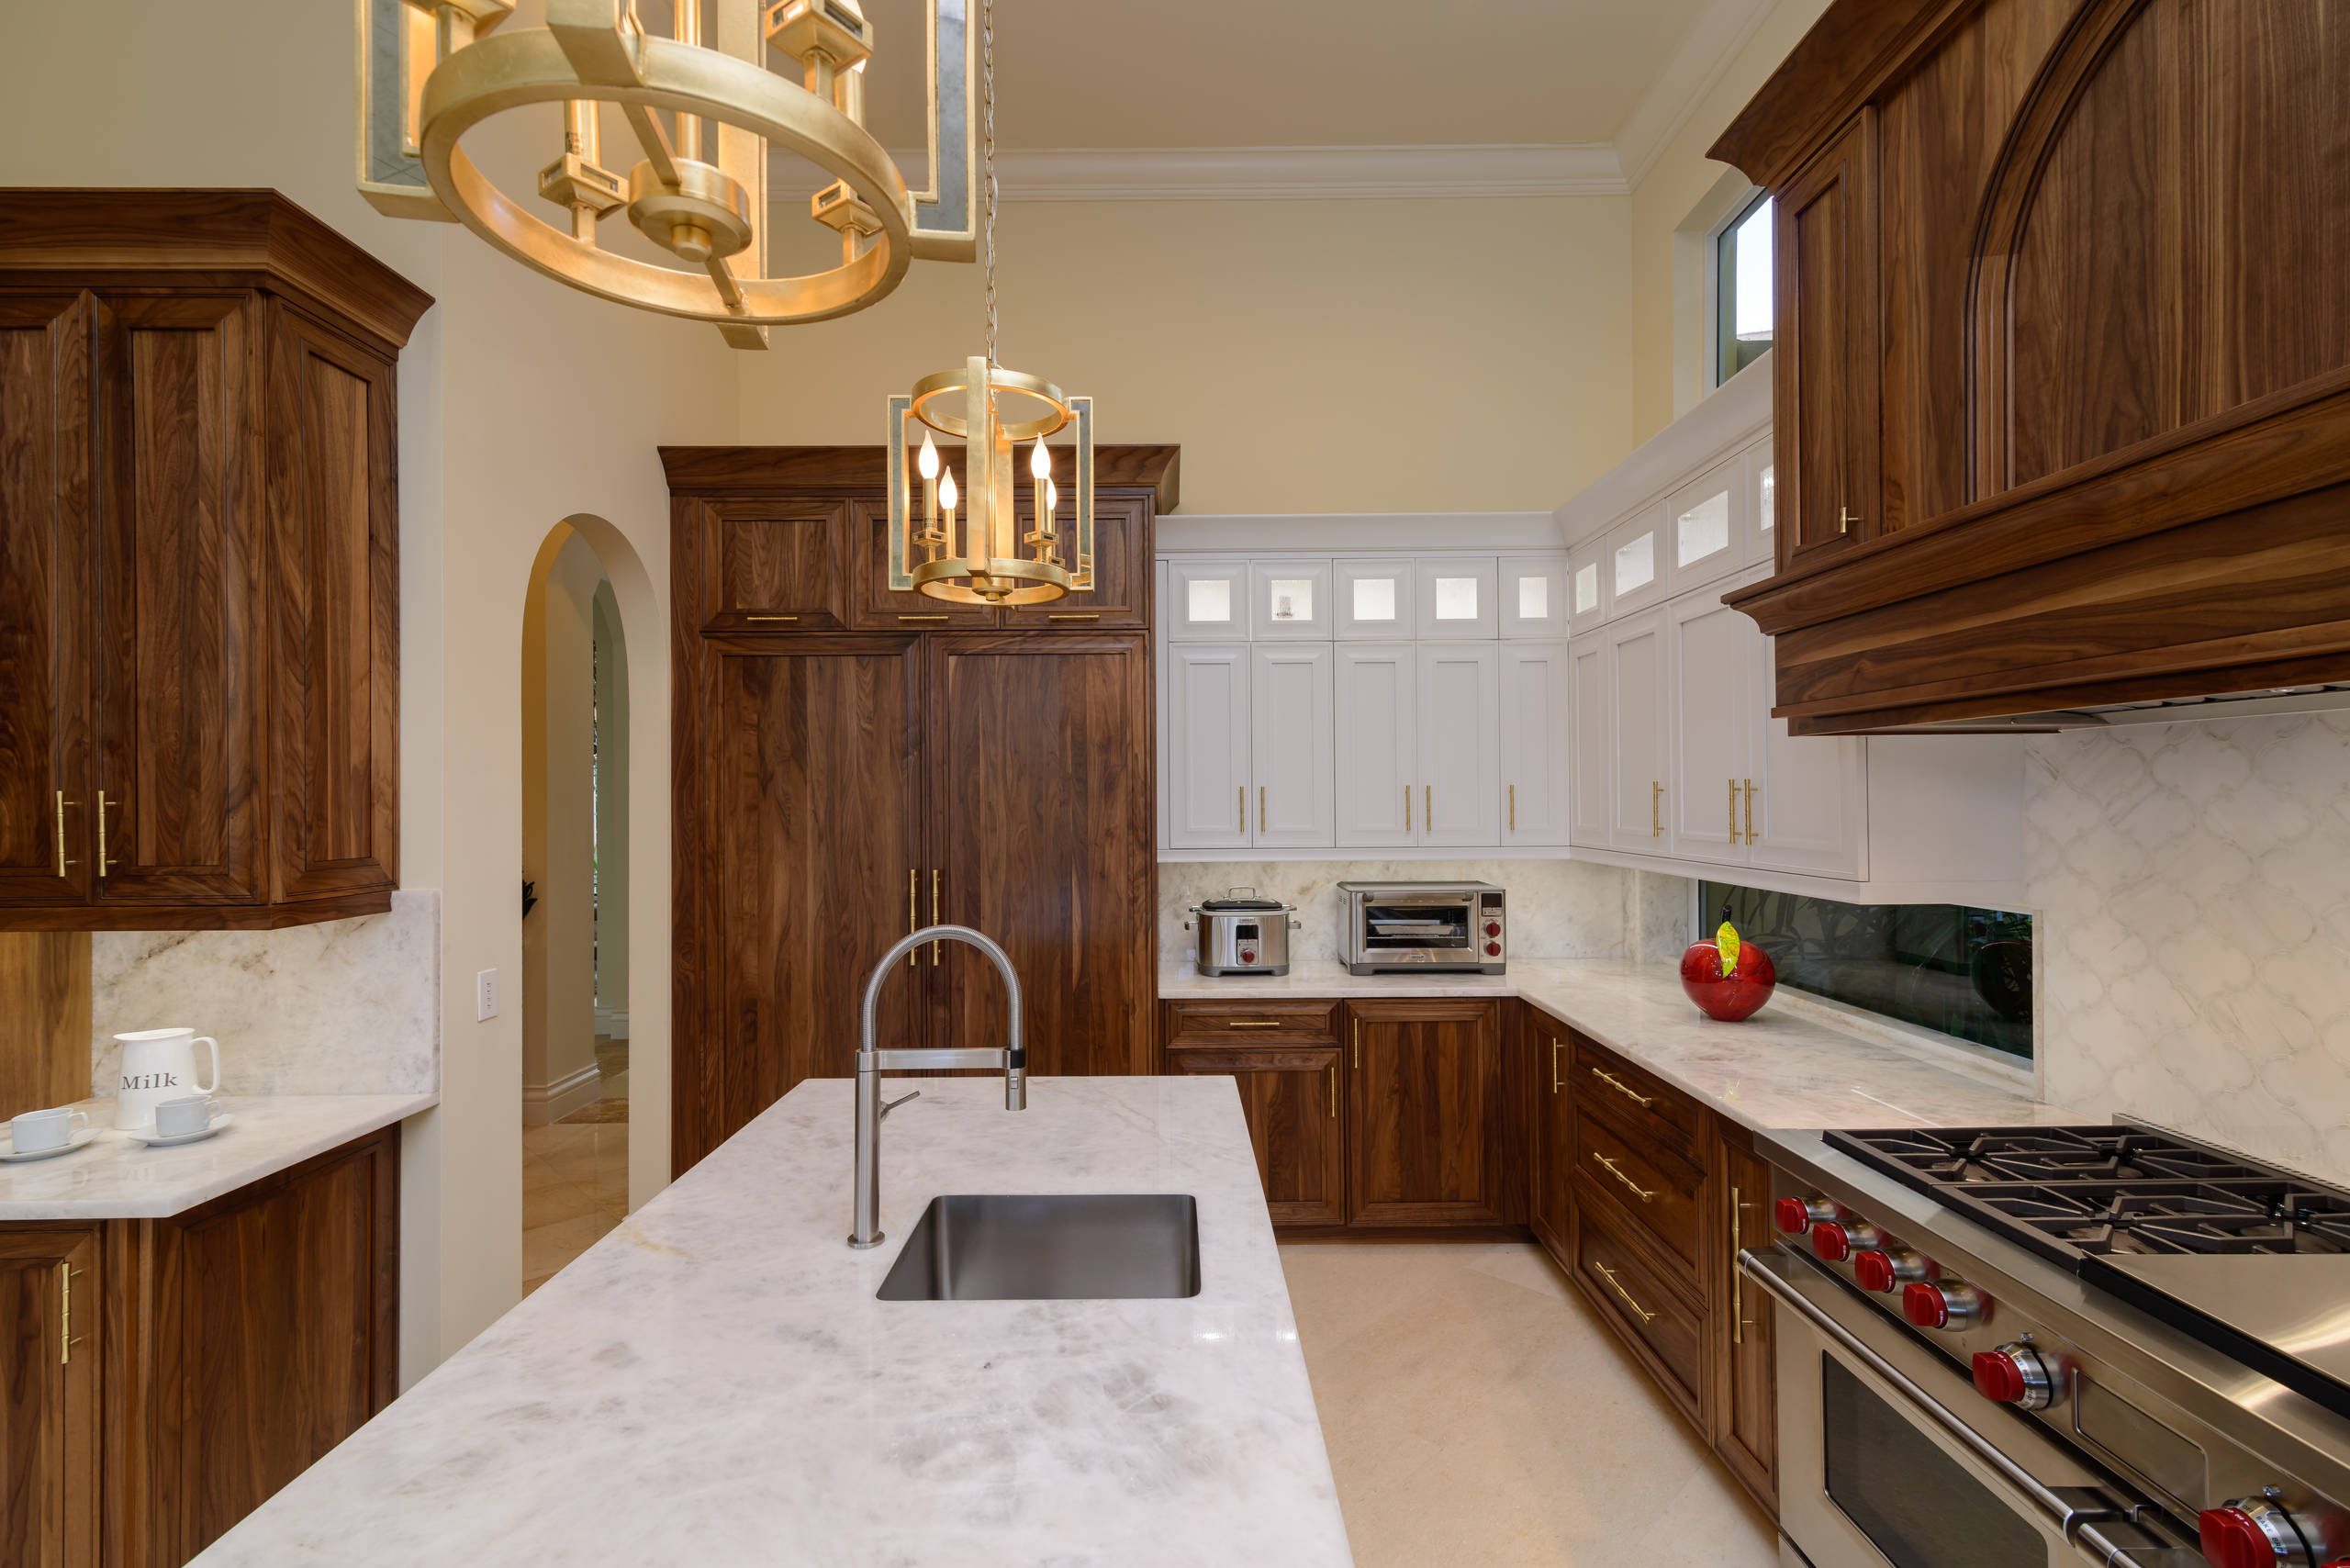 kitchen and bath remodeling delray beach fl